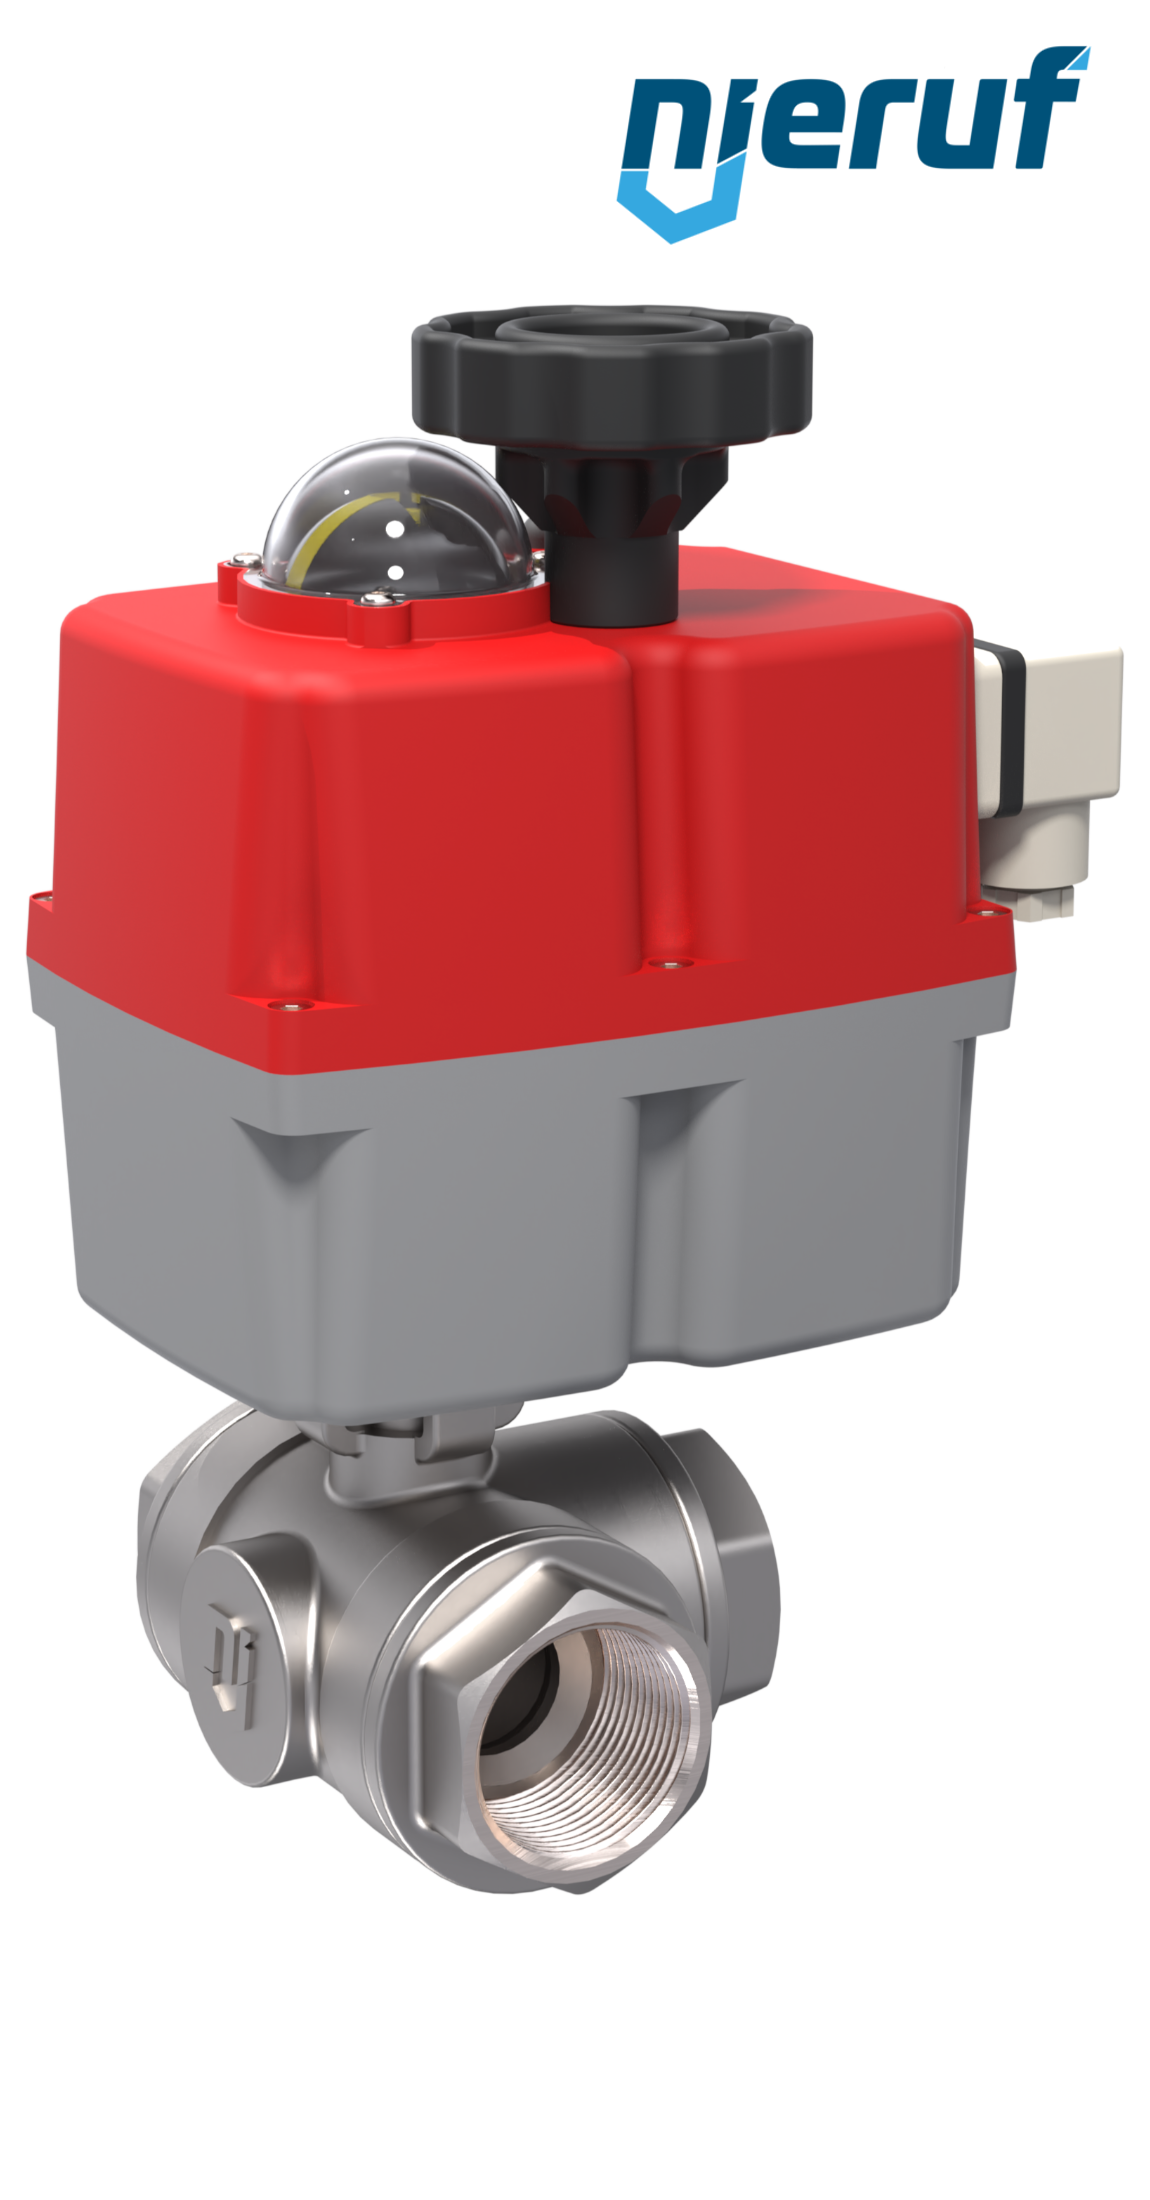 3 way automatic-ball valve 24-240V DN40 - 1 1/2" inch stainless steel reduced port design with T drilling